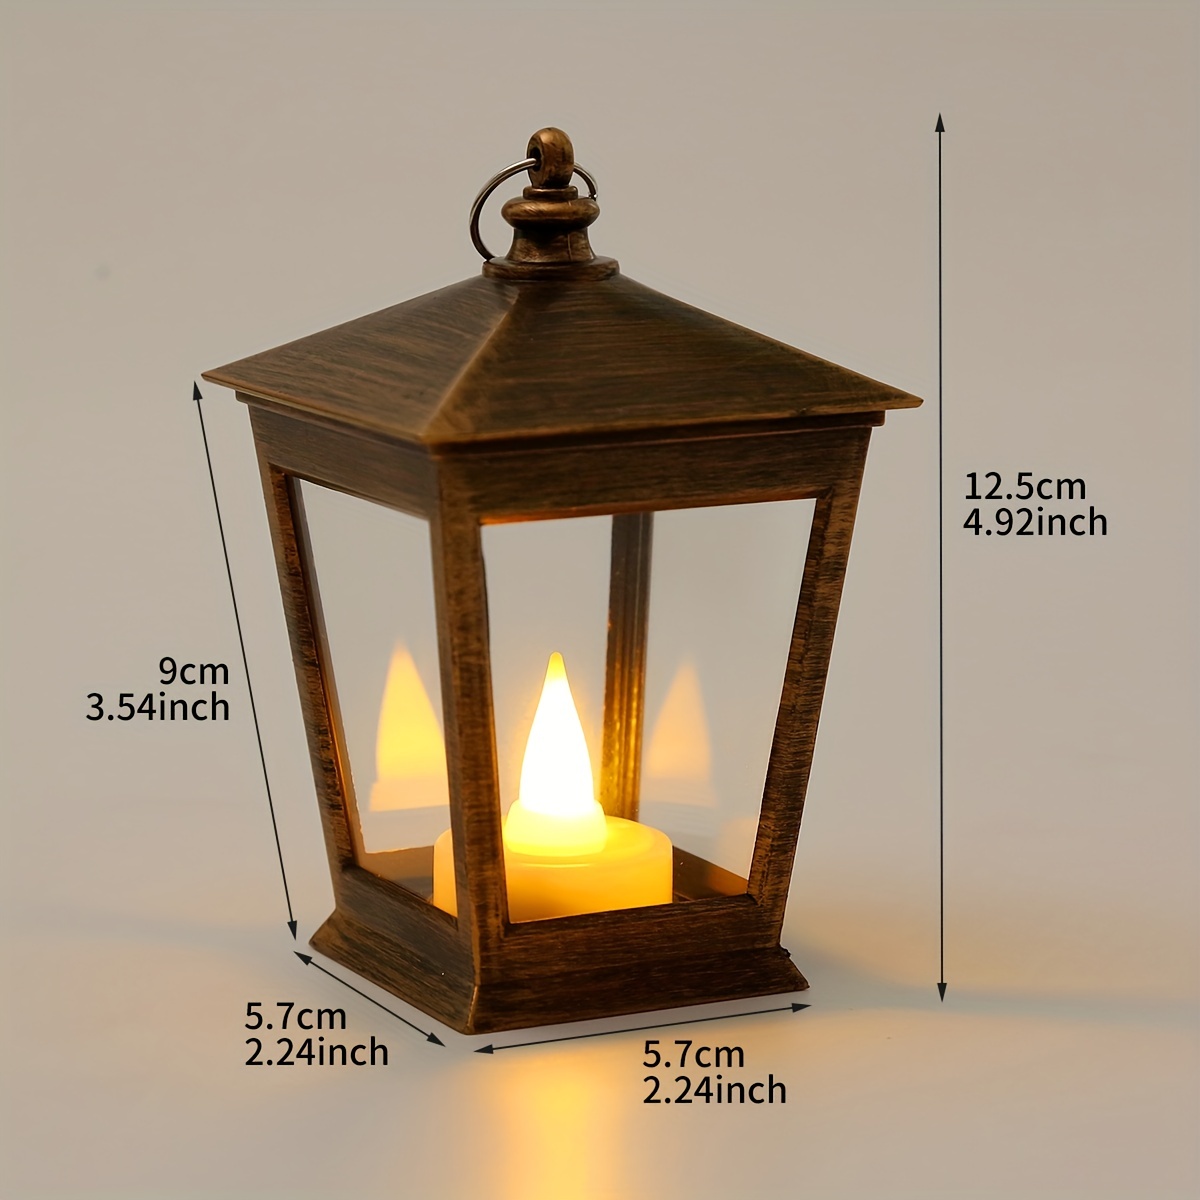 Flickering Led Candle Lantern, Battery Included, Vintage